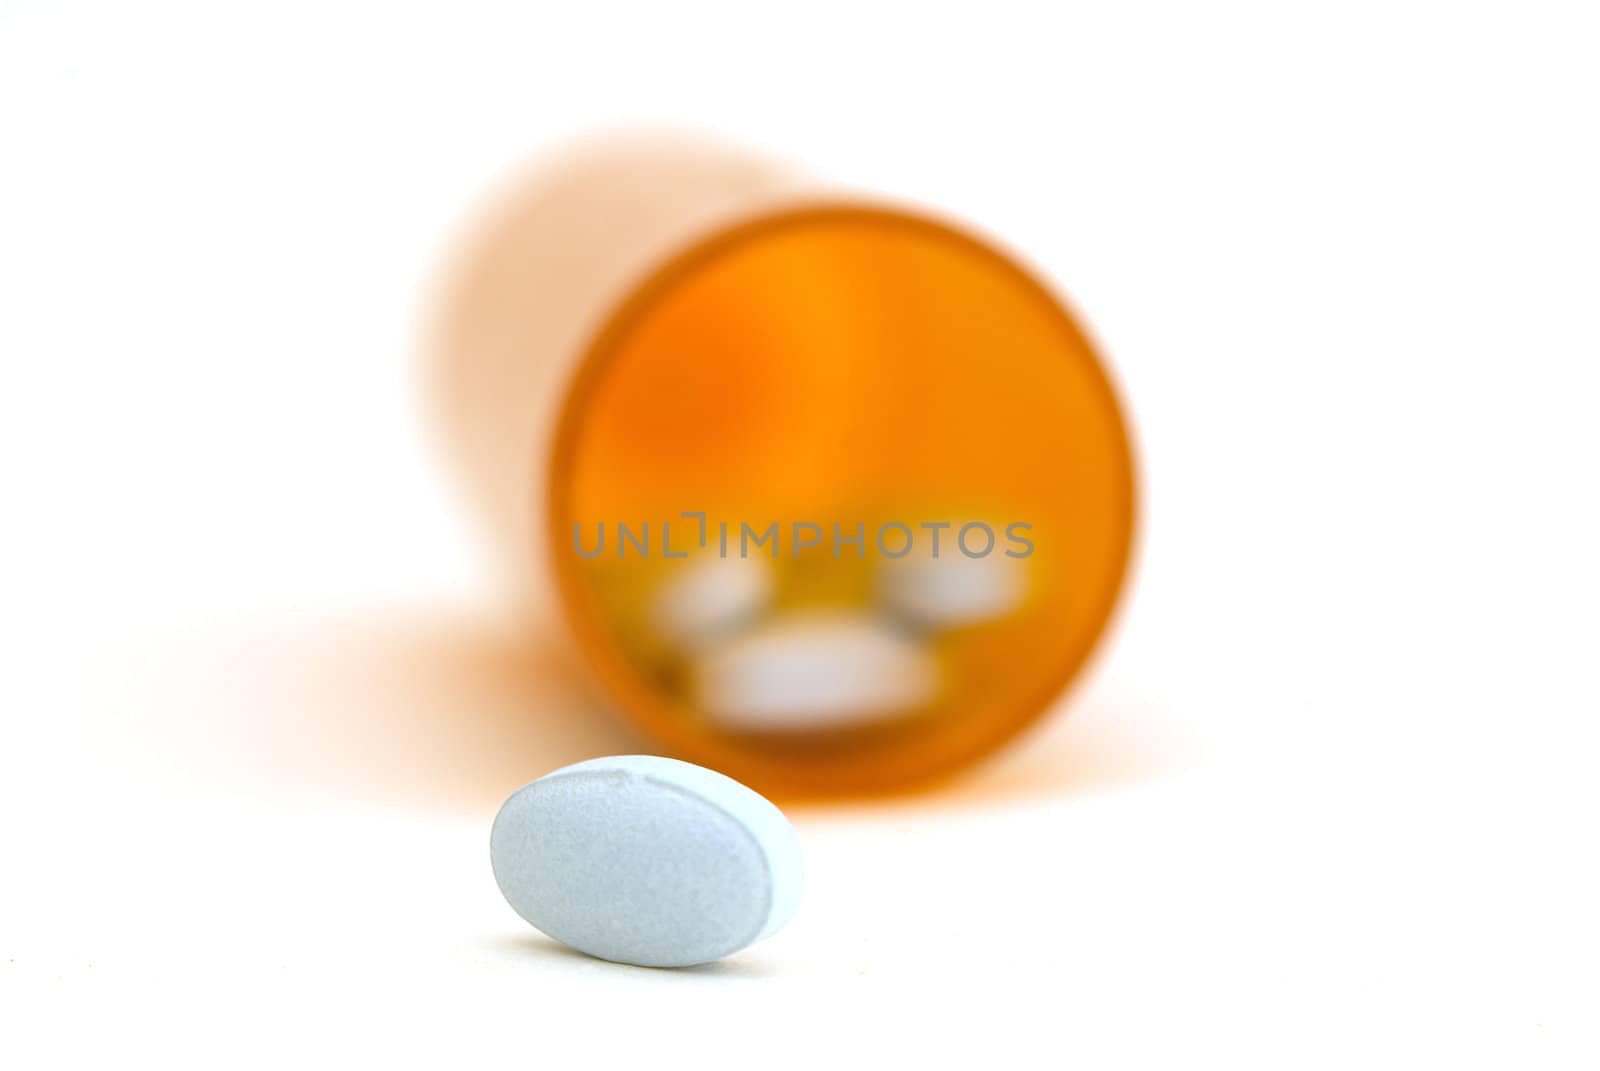 A close up of pills coming out of a bottle on white